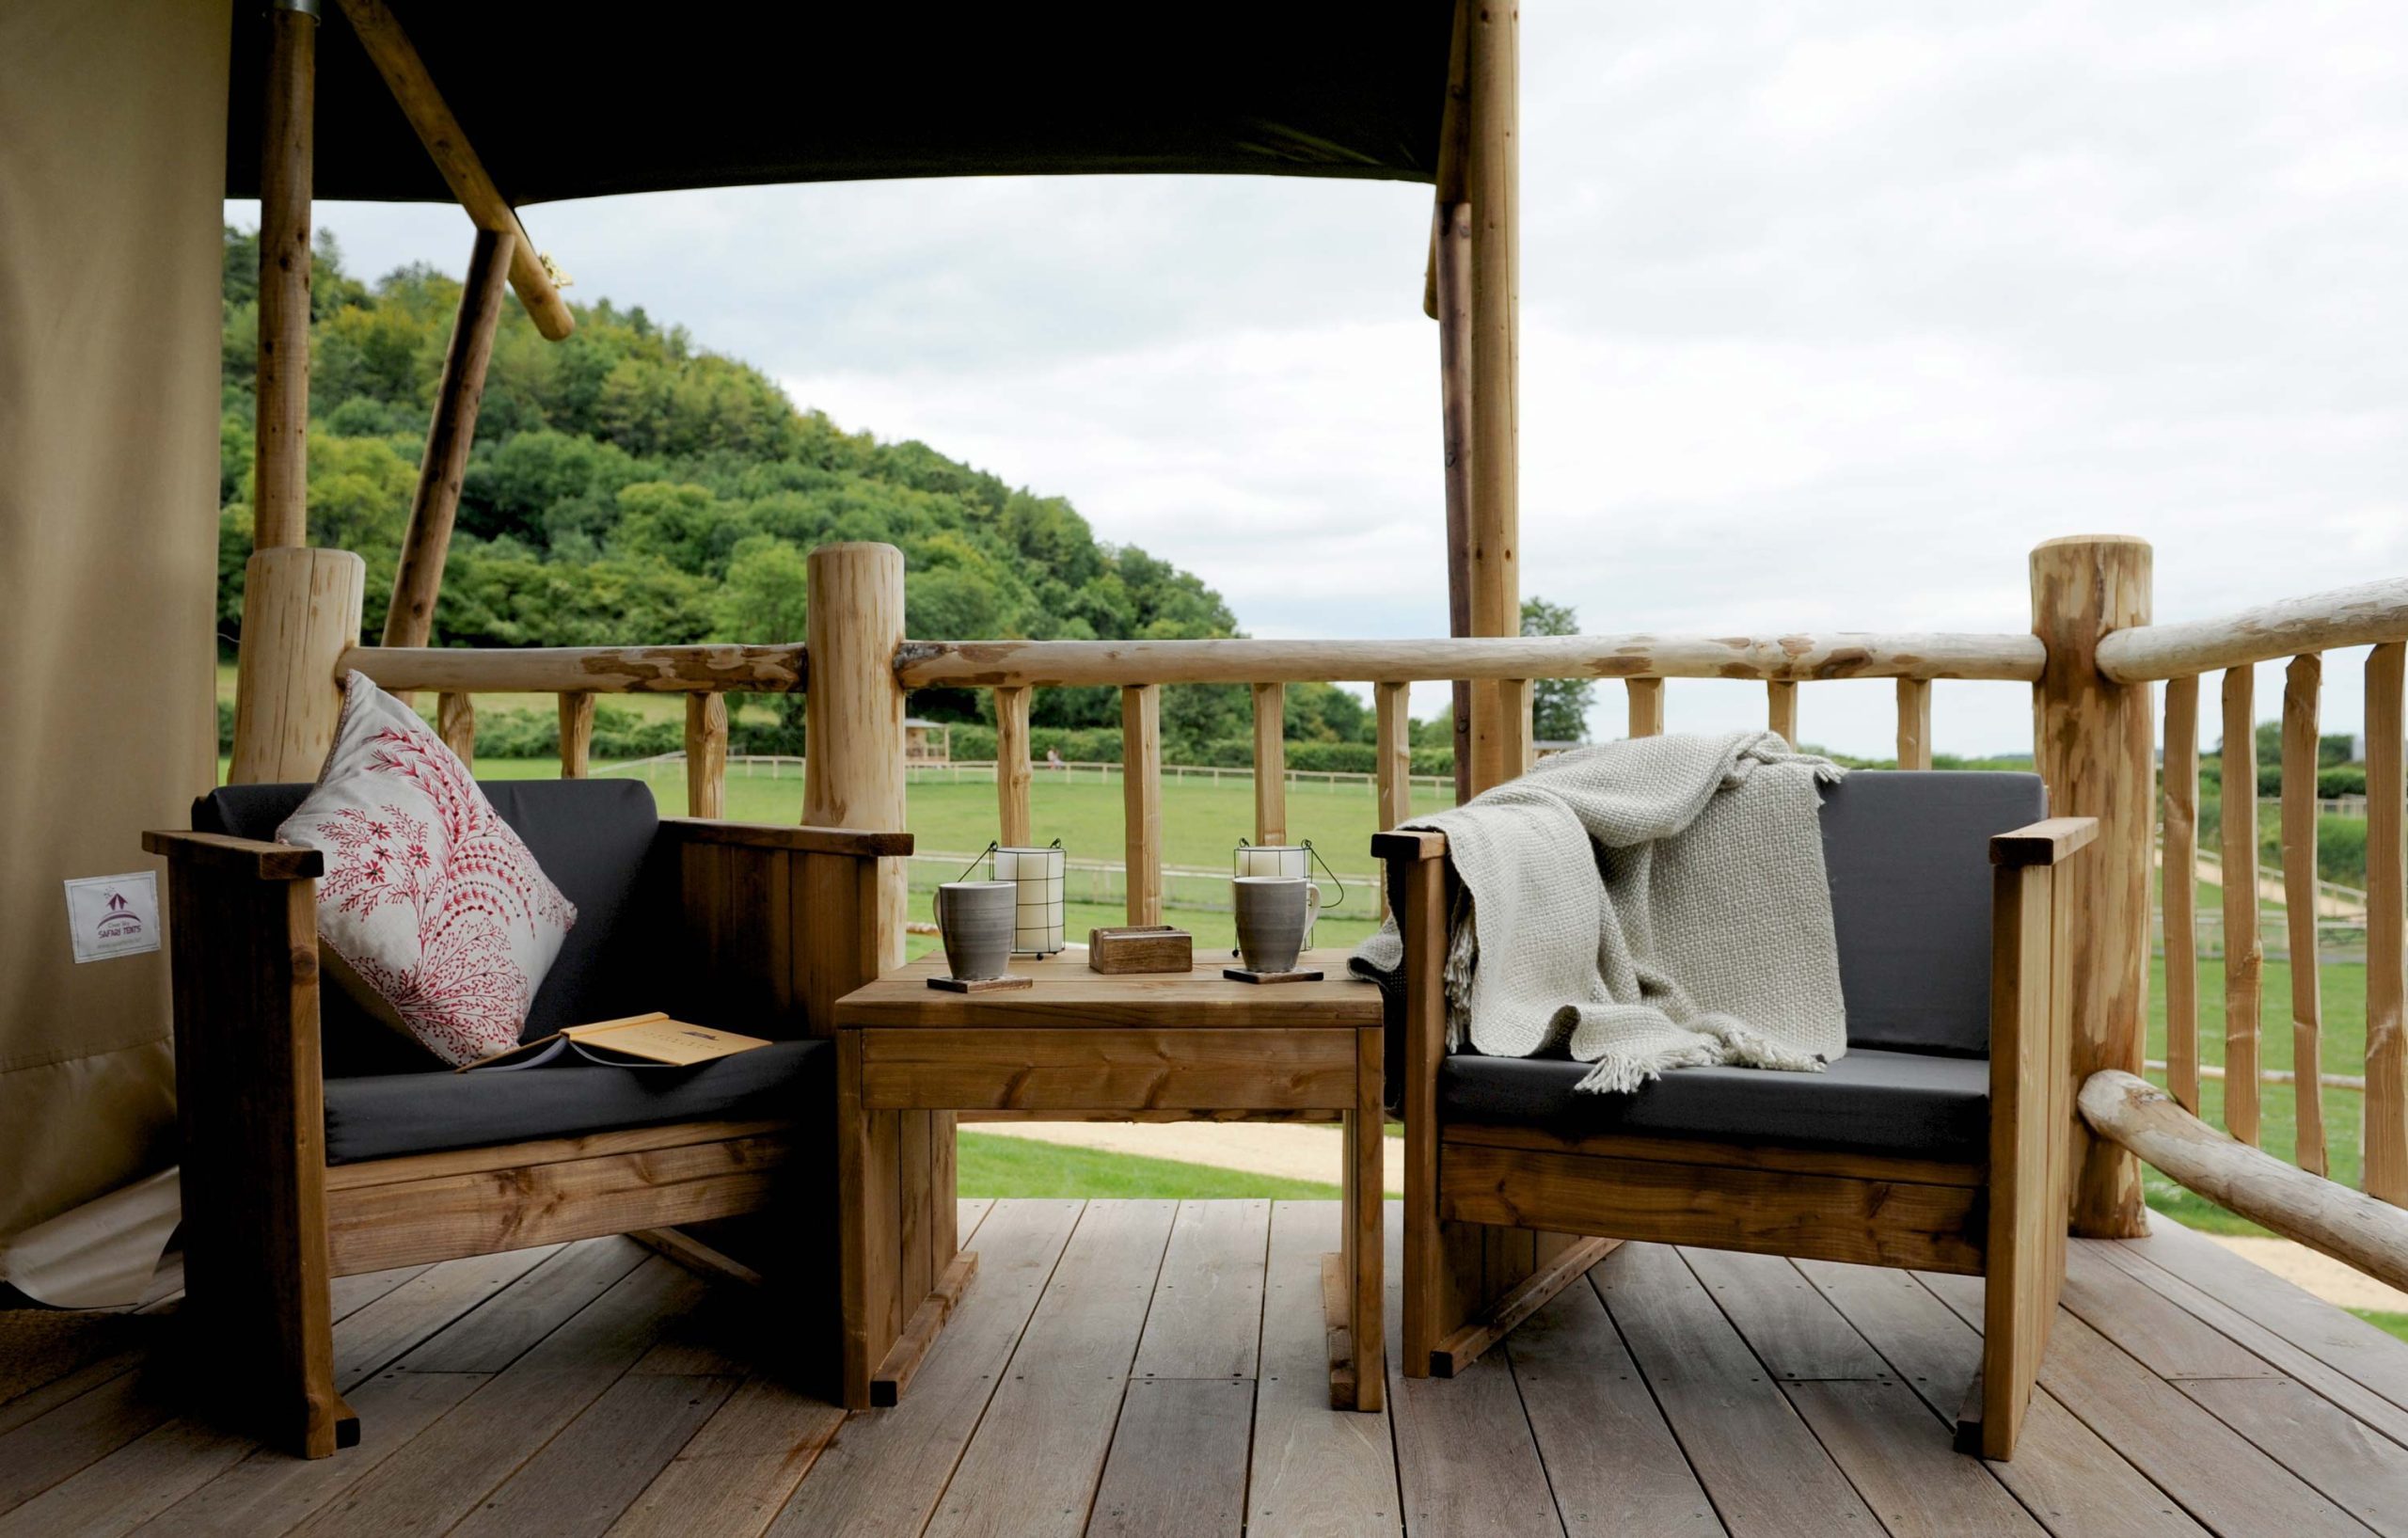 Comfy chairs and cosy blankets on the deck area of a Loose Reins' lodge